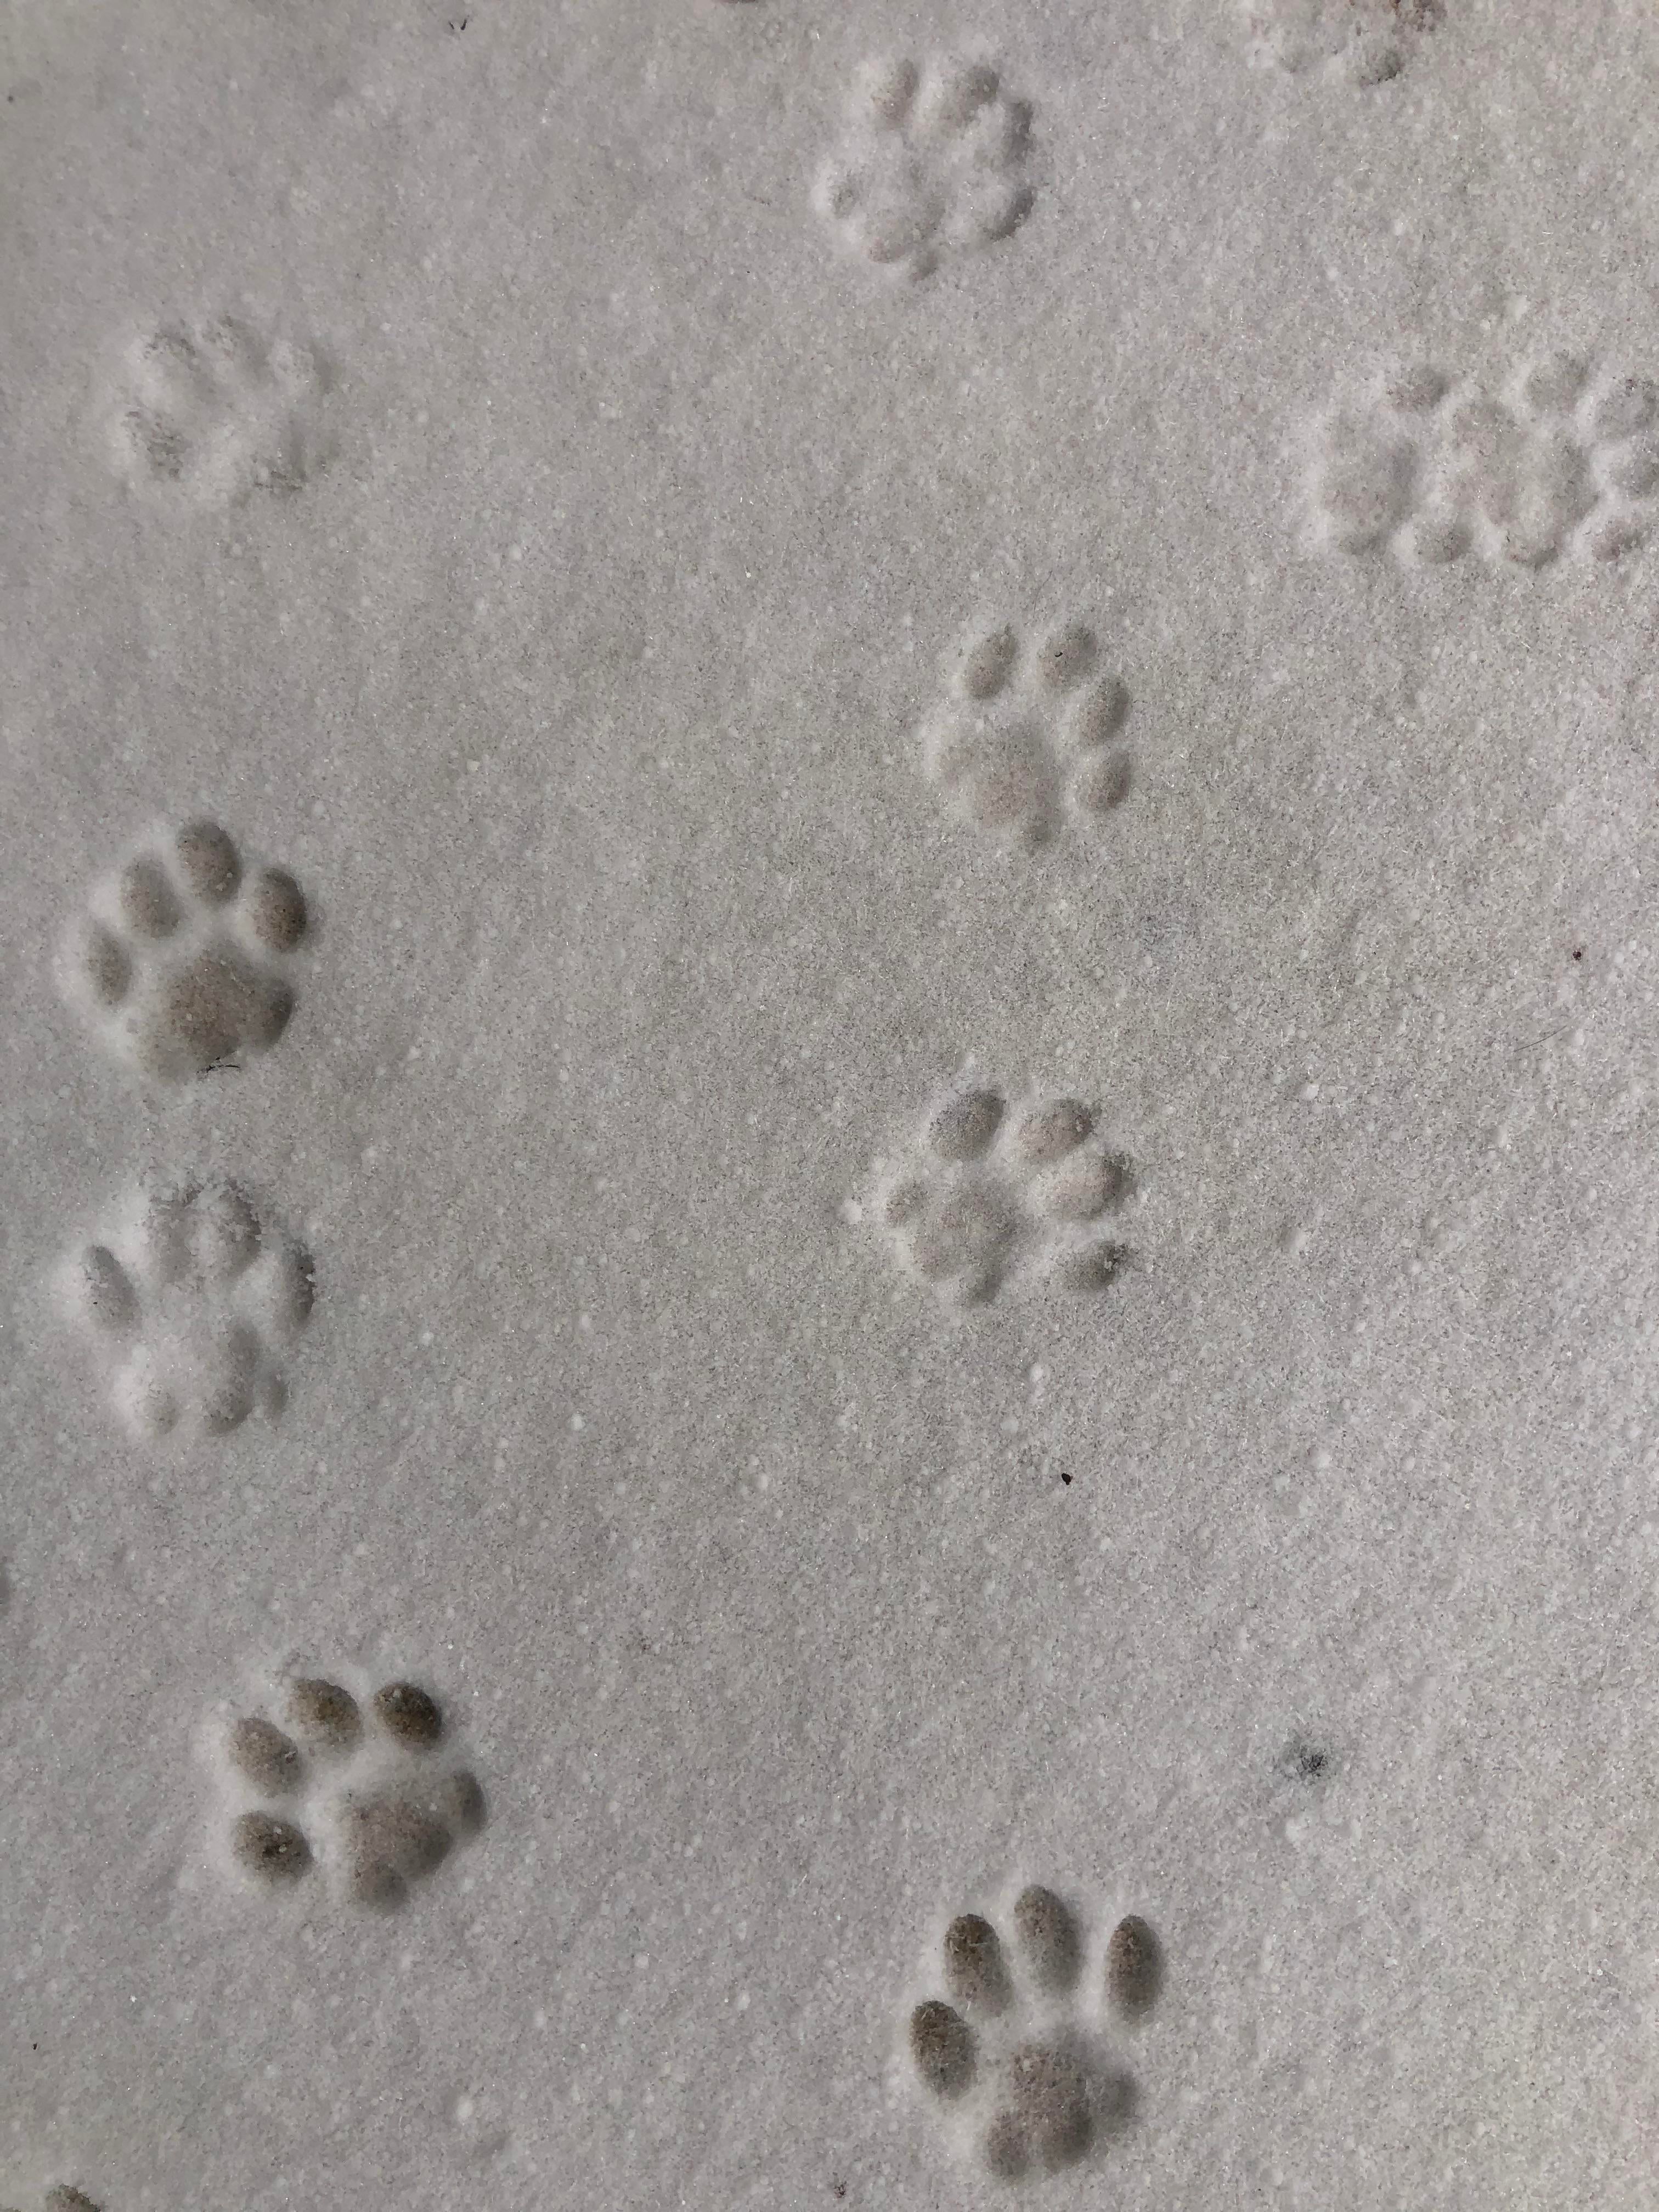 My cats first paw prints in the snow